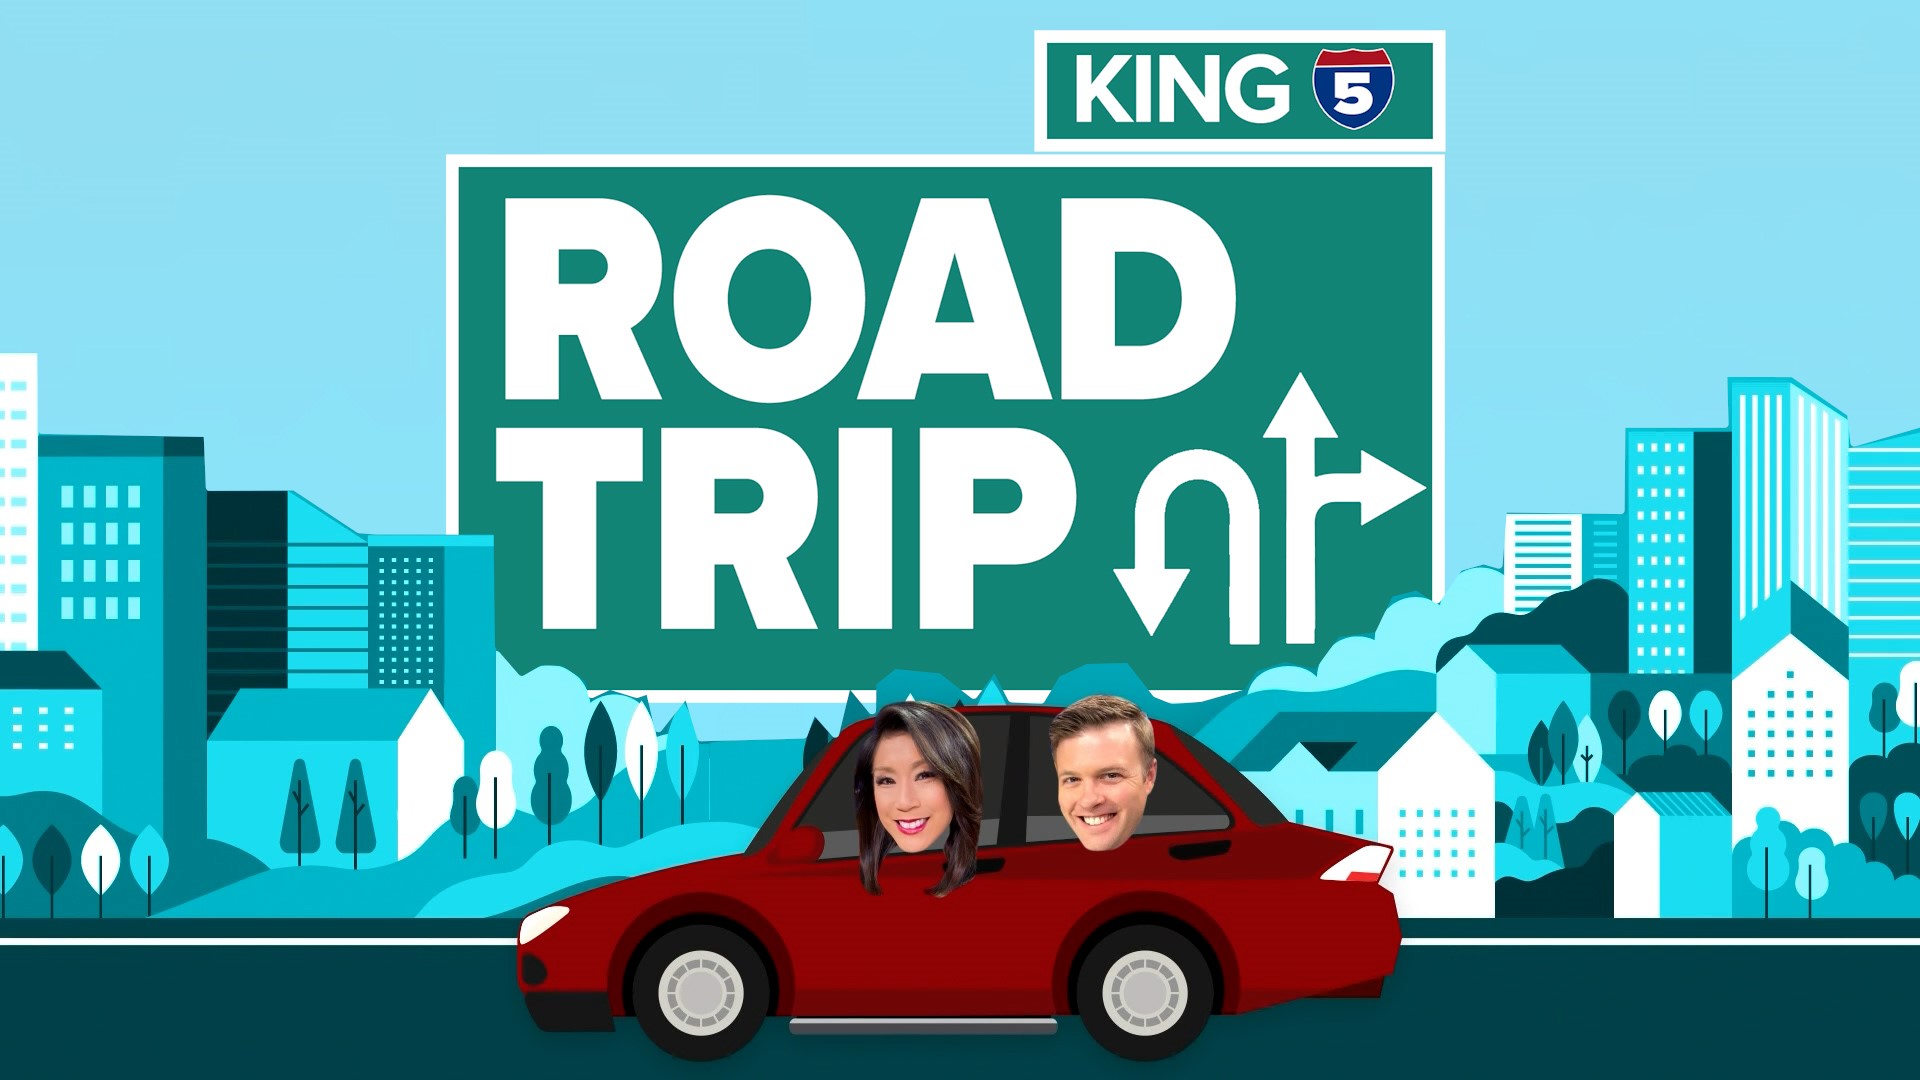 Mimi and Jake kick off summer with a road trip to some of Washington's beautiful small towns and islands for some fun day trip ideas.